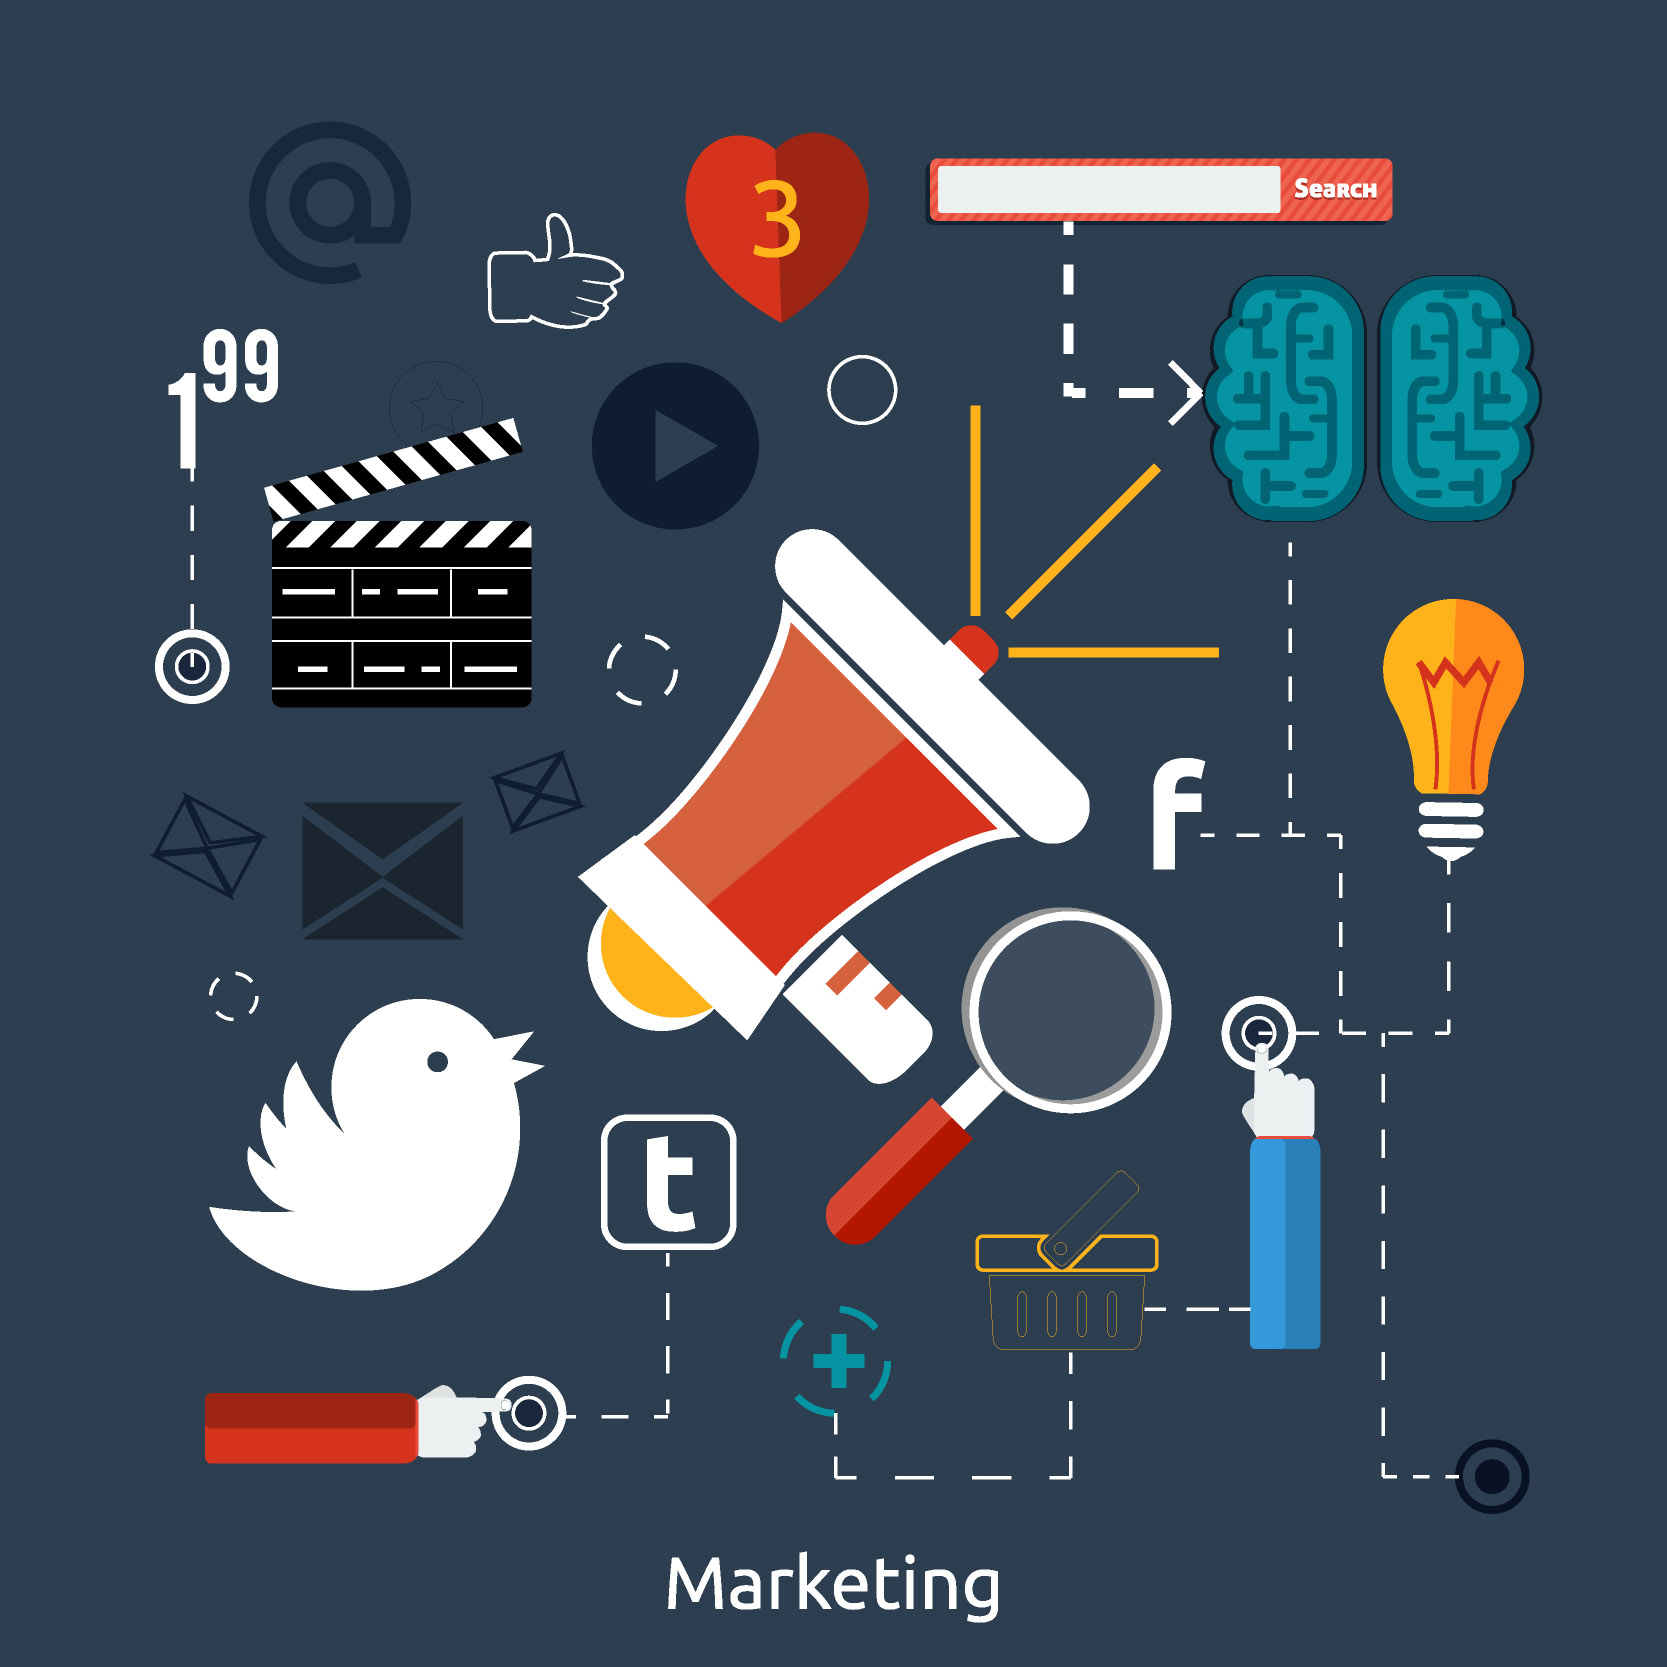 icon for marketing including social media icons